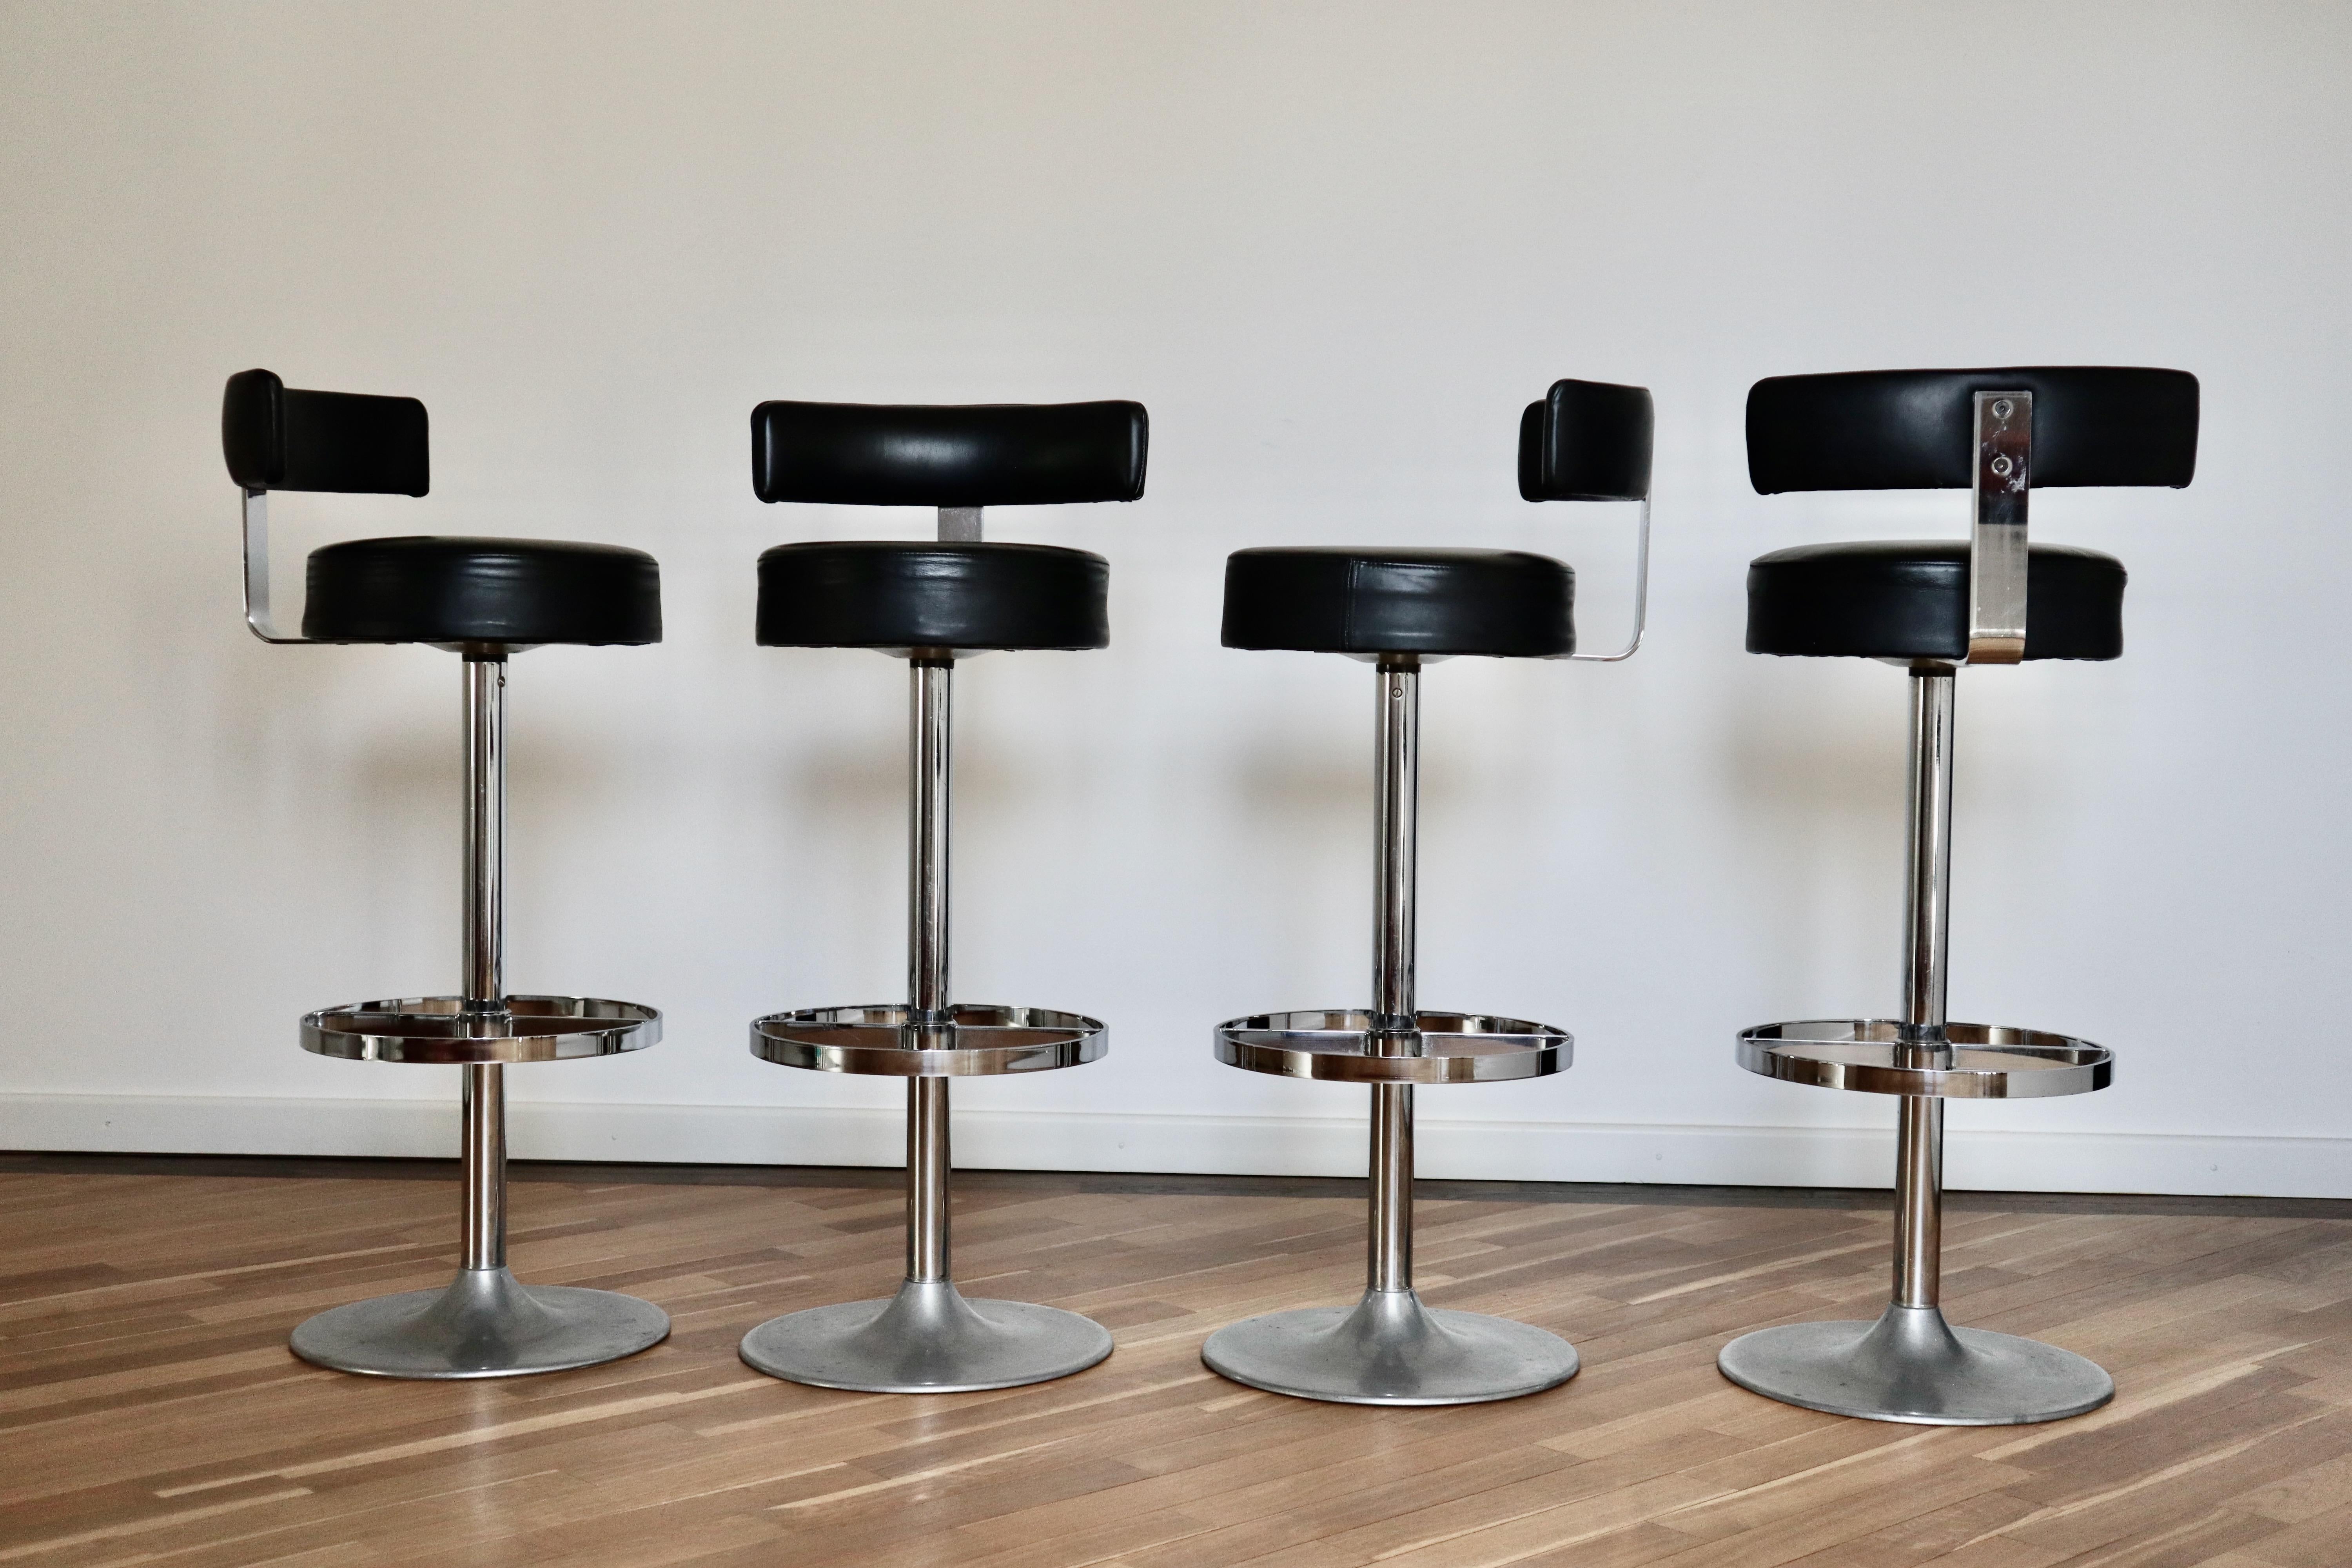 Set of four Mid-Century Modern bar stools in the Mid Century Modern Bauhaus Style of Le Corbusier, Marcel Breuer and friends. Made in Italy in 1970 with light and attractive patina for an authentic clean look, but not so heavy as to appear 